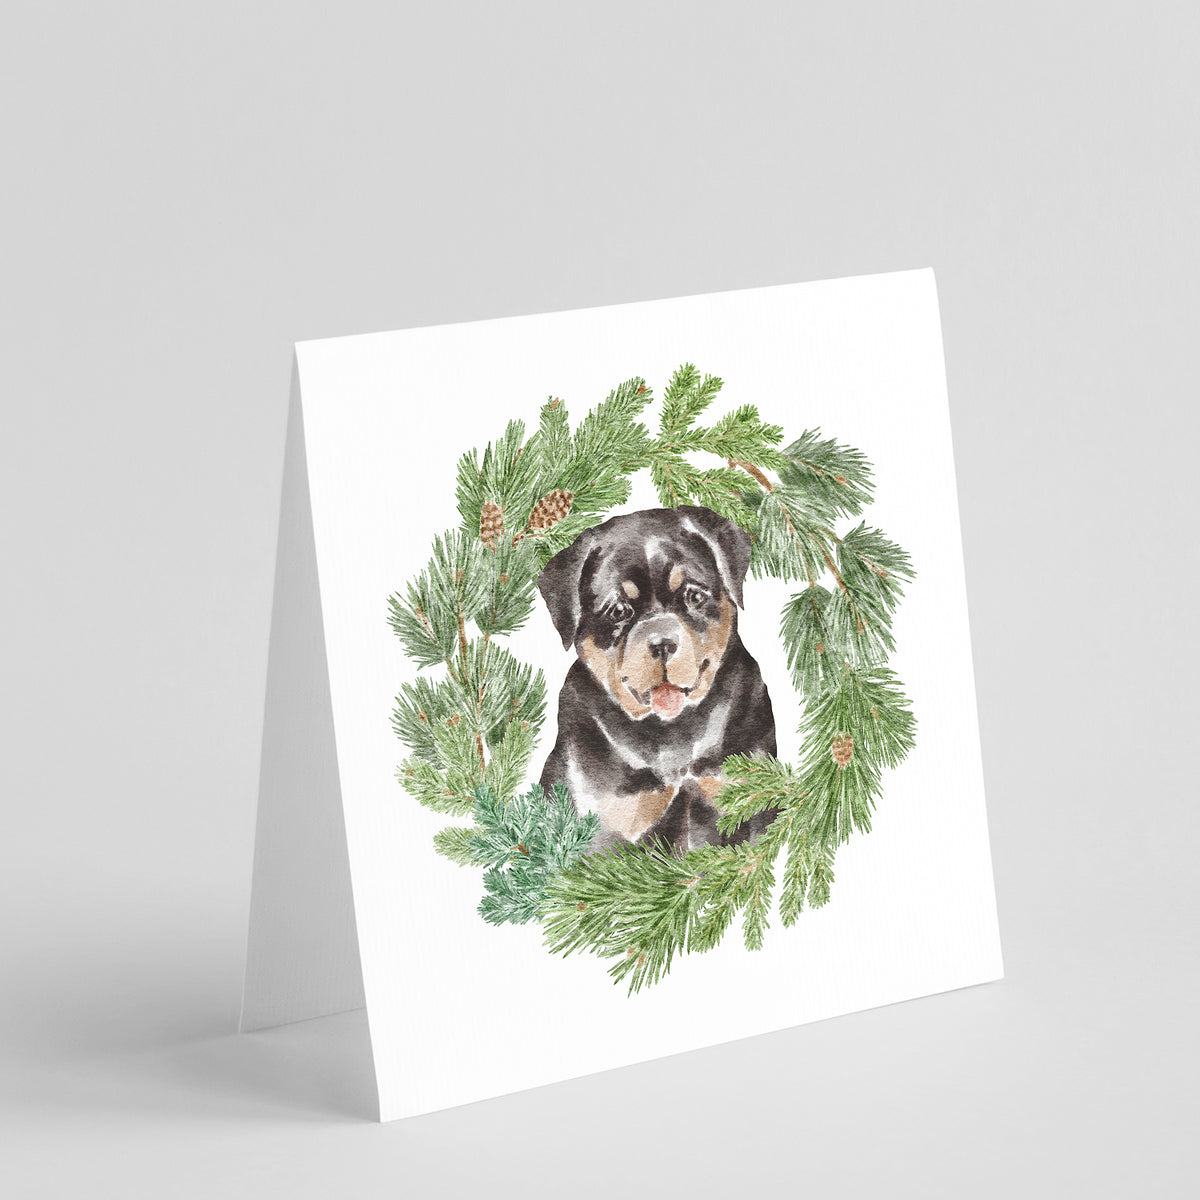 Buy this Rottweiler Puppy with Christmas Wreath Square Greeting Cards and Envelopes Pack of 8